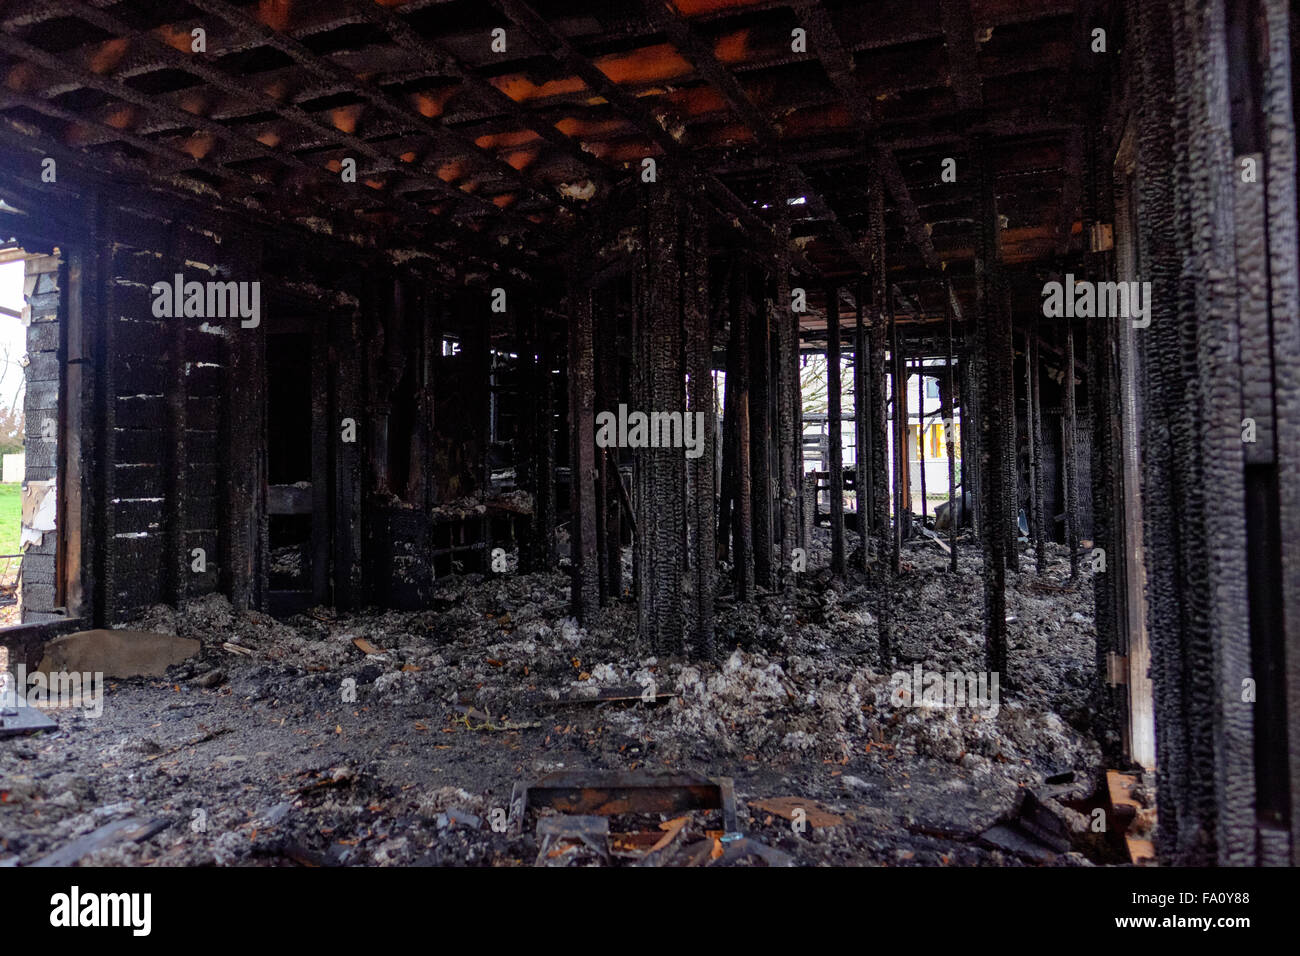 House burned almost completely in a major fire leaving only the damaged remains of this home. Stock Photo